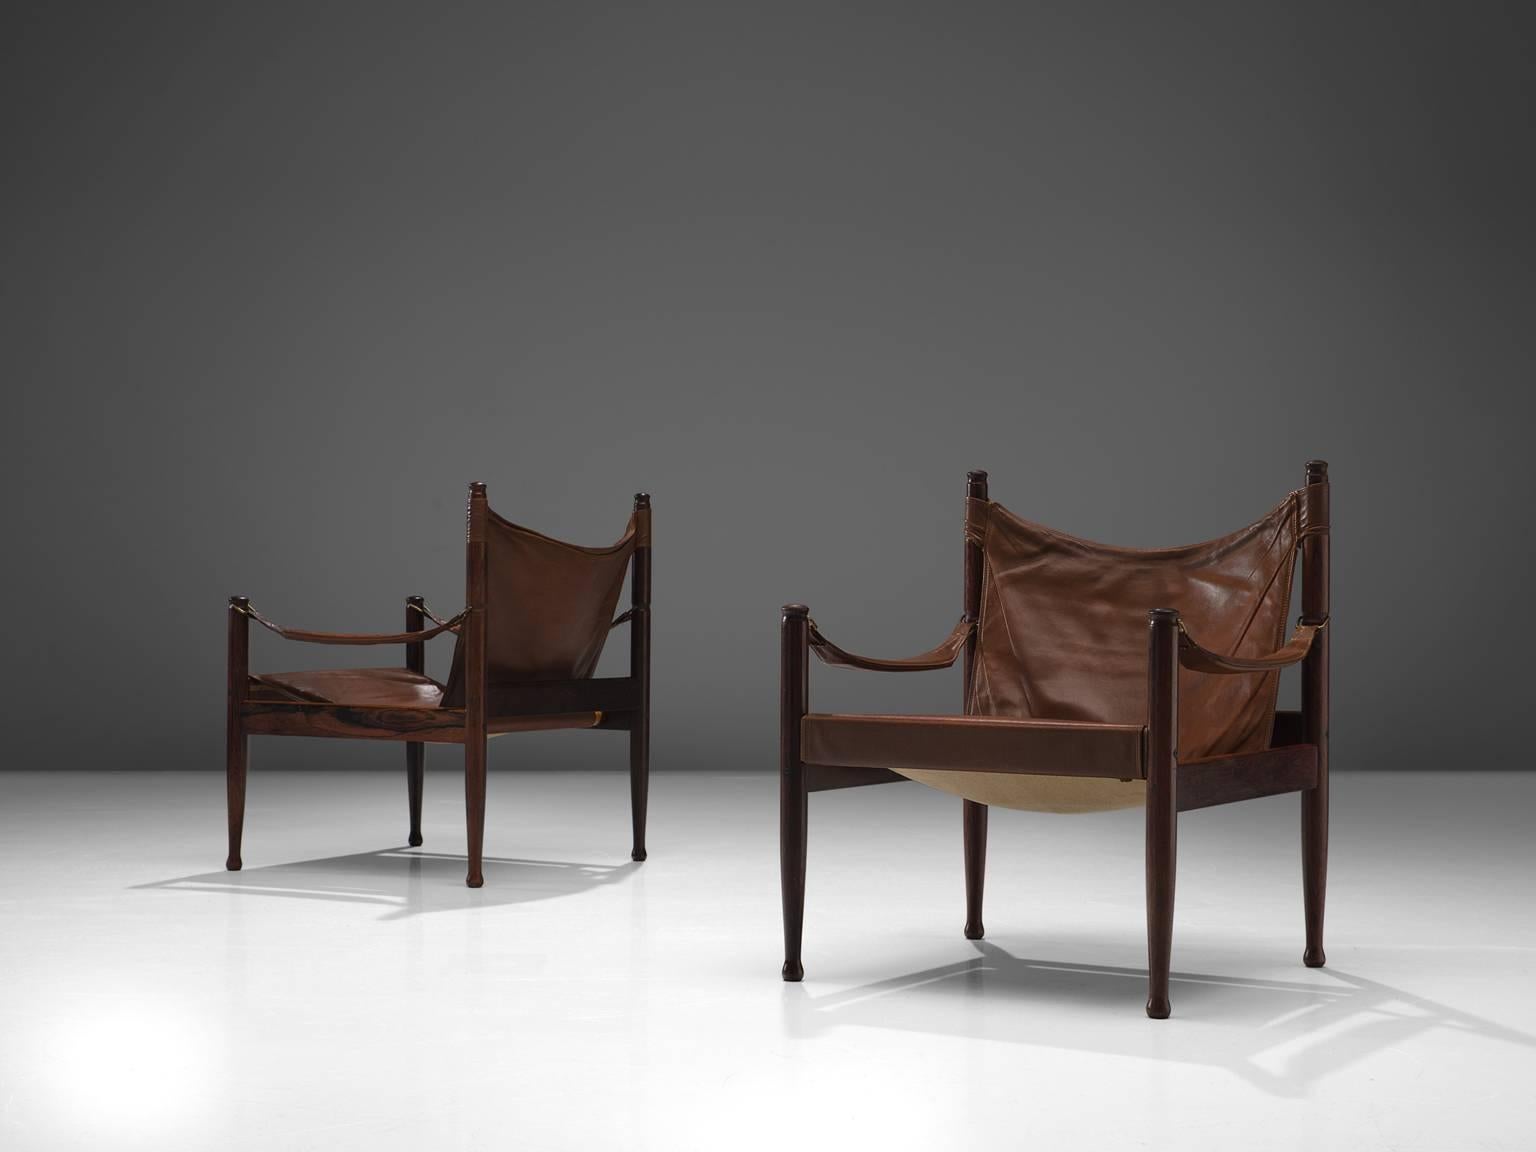 Erik Wørts for Niels Eilsersen, set of two armchairs, rosewood and leather, Denmark, 1960s. 

Sturdy lounge chairs with refined details. These safari easy chairs get a strong expression by the leather armrests and seating and back. The wooden frame